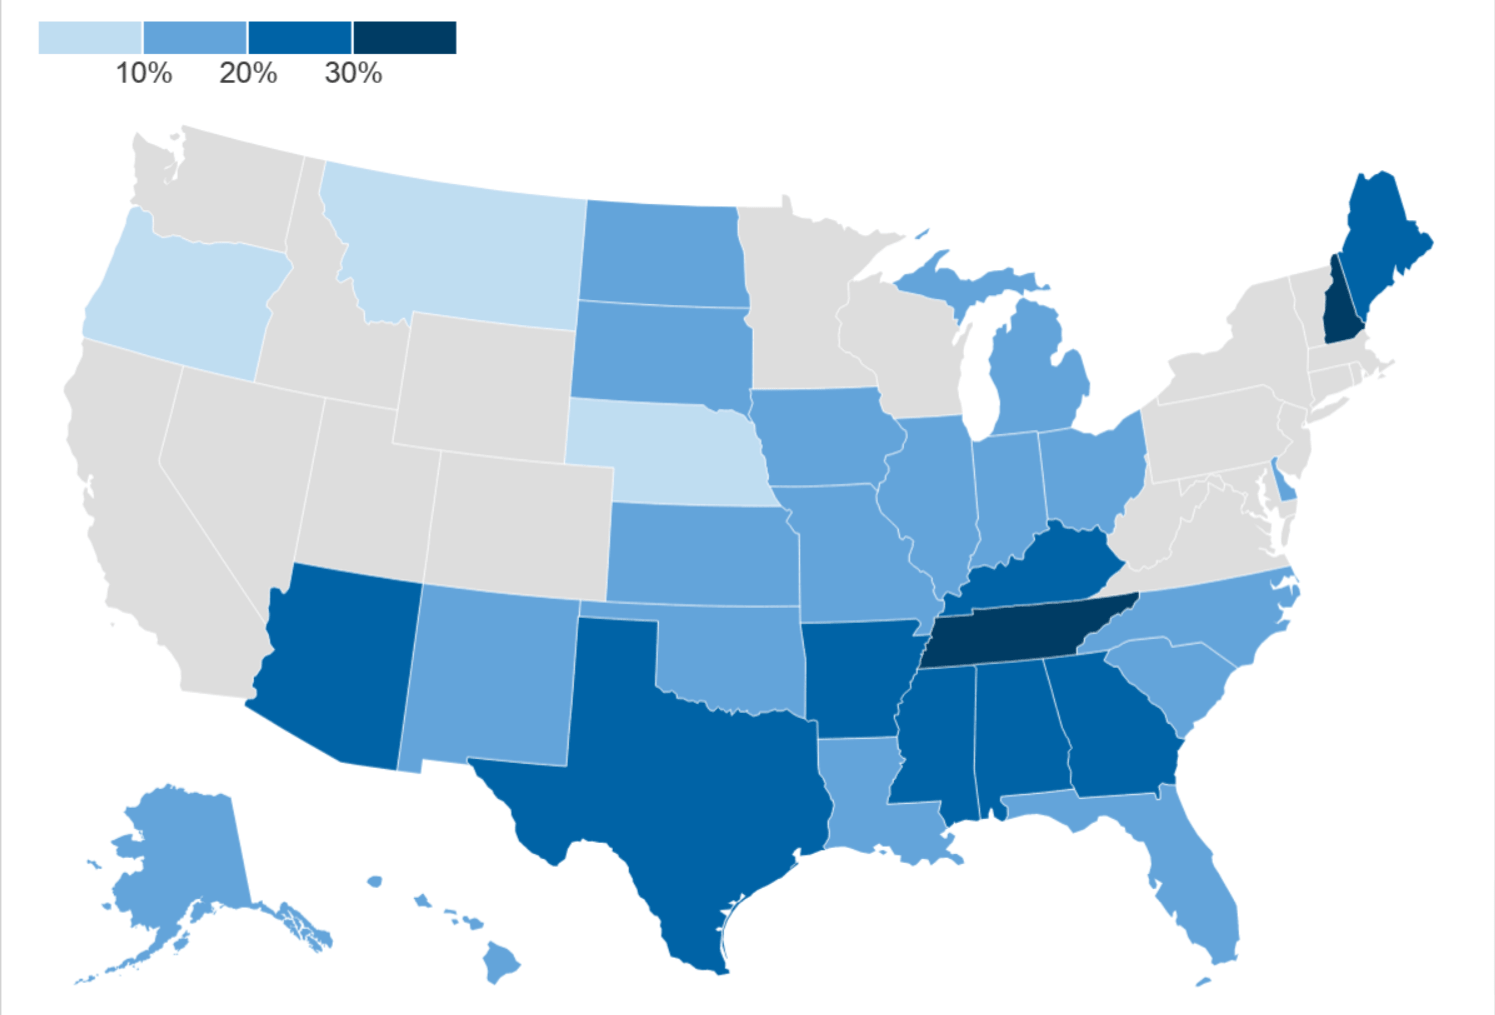 State-wise-average-denial-rate-for-in-network-claims